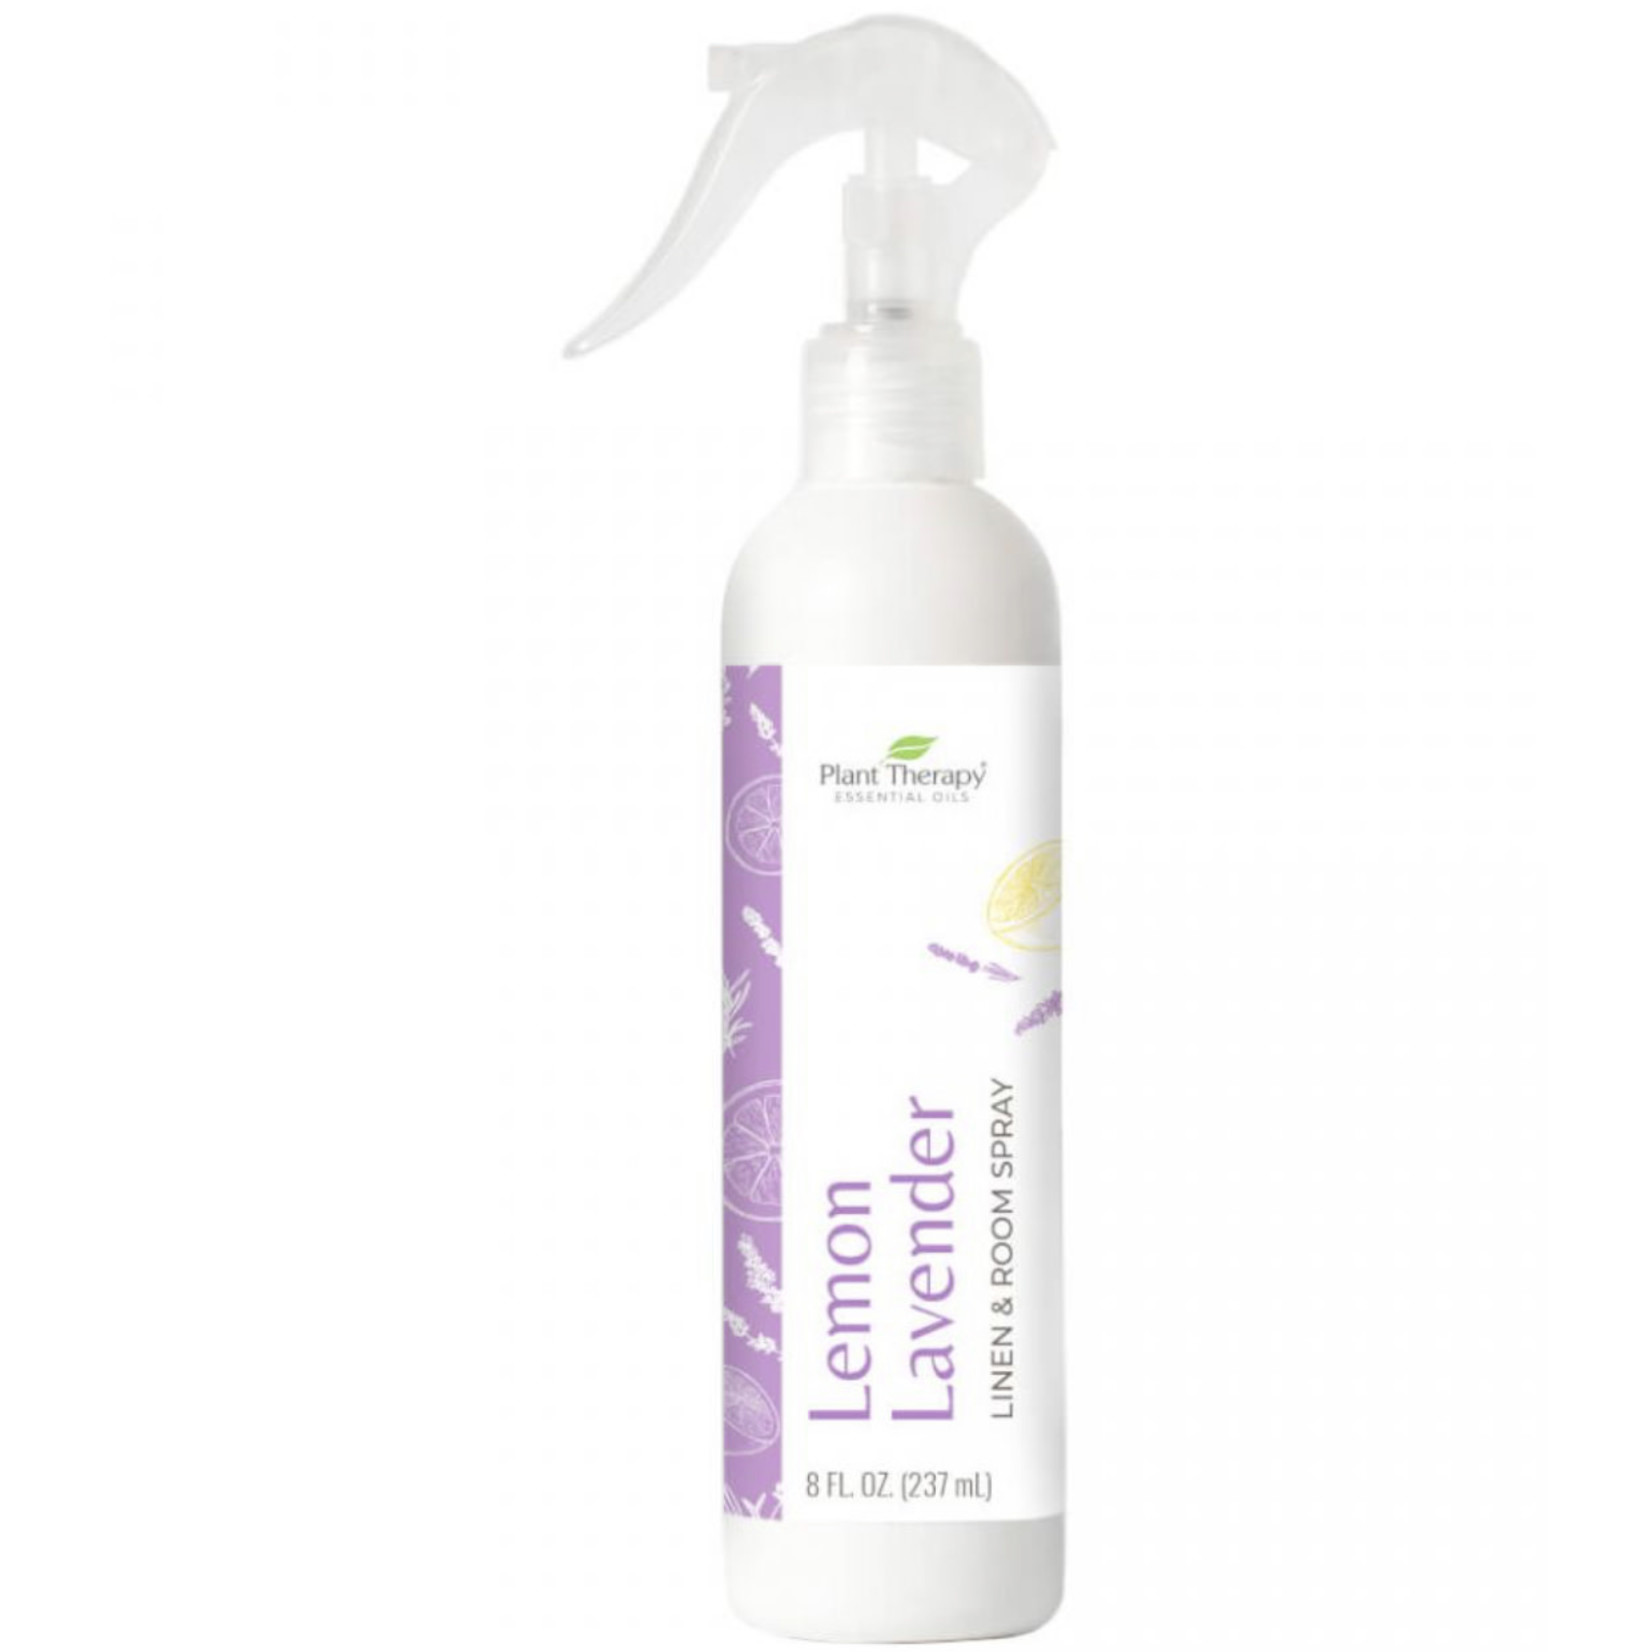 Plant Therapy Linen and Room Spray - Lemon Lavender